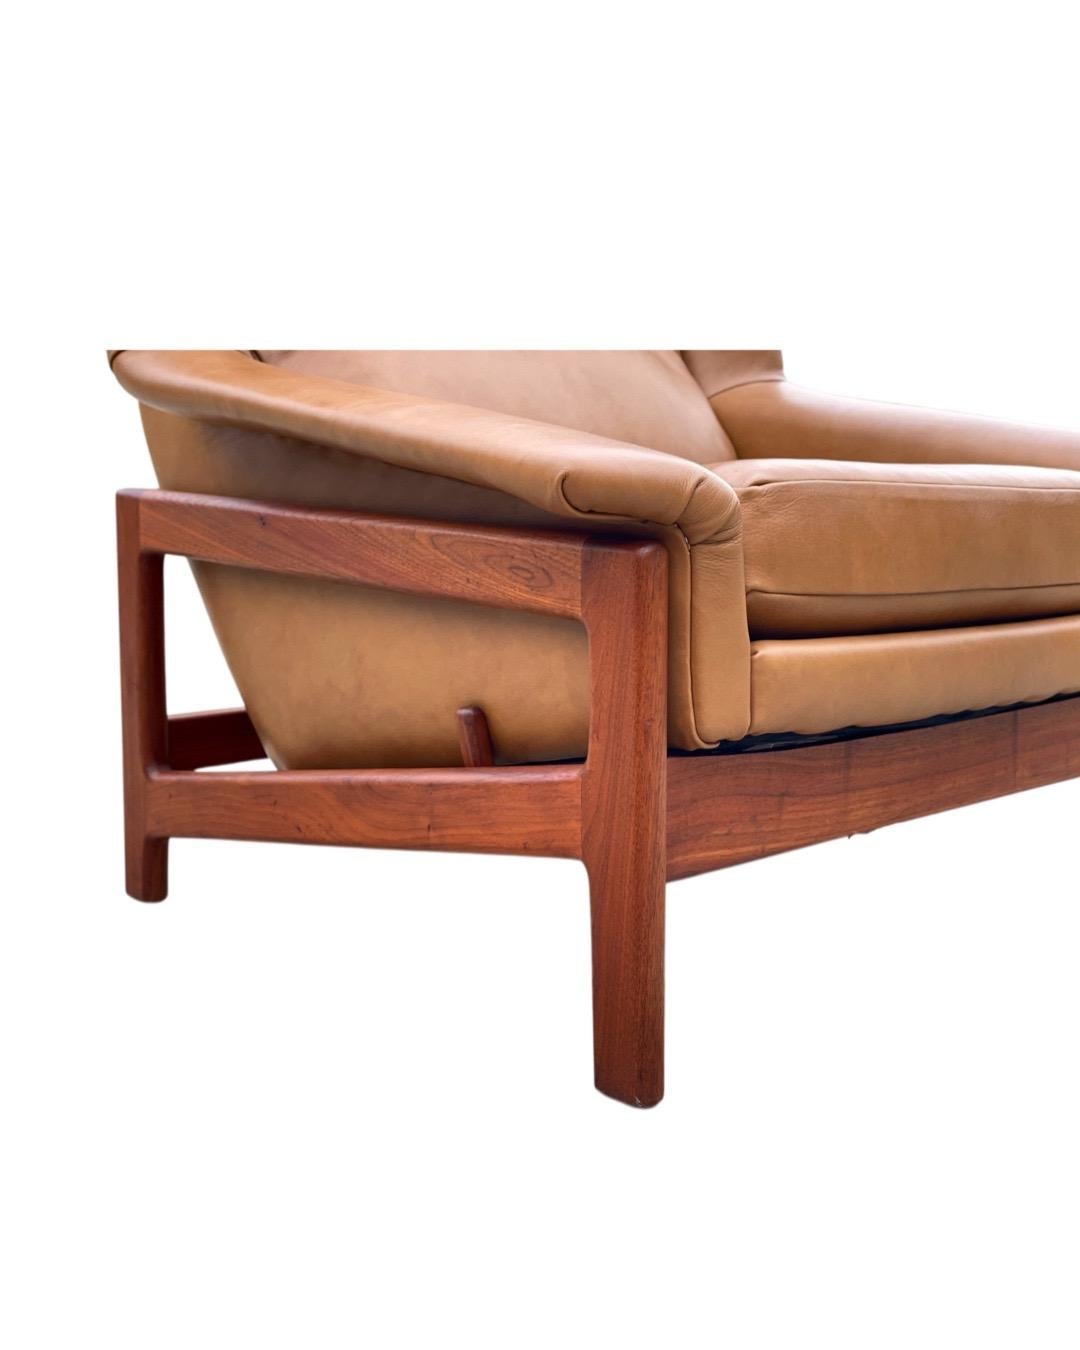 Swedish Midcentury Reclining Lounge Chairs in Leather + Walnut by Folke Ohlsson for DUX For Sale